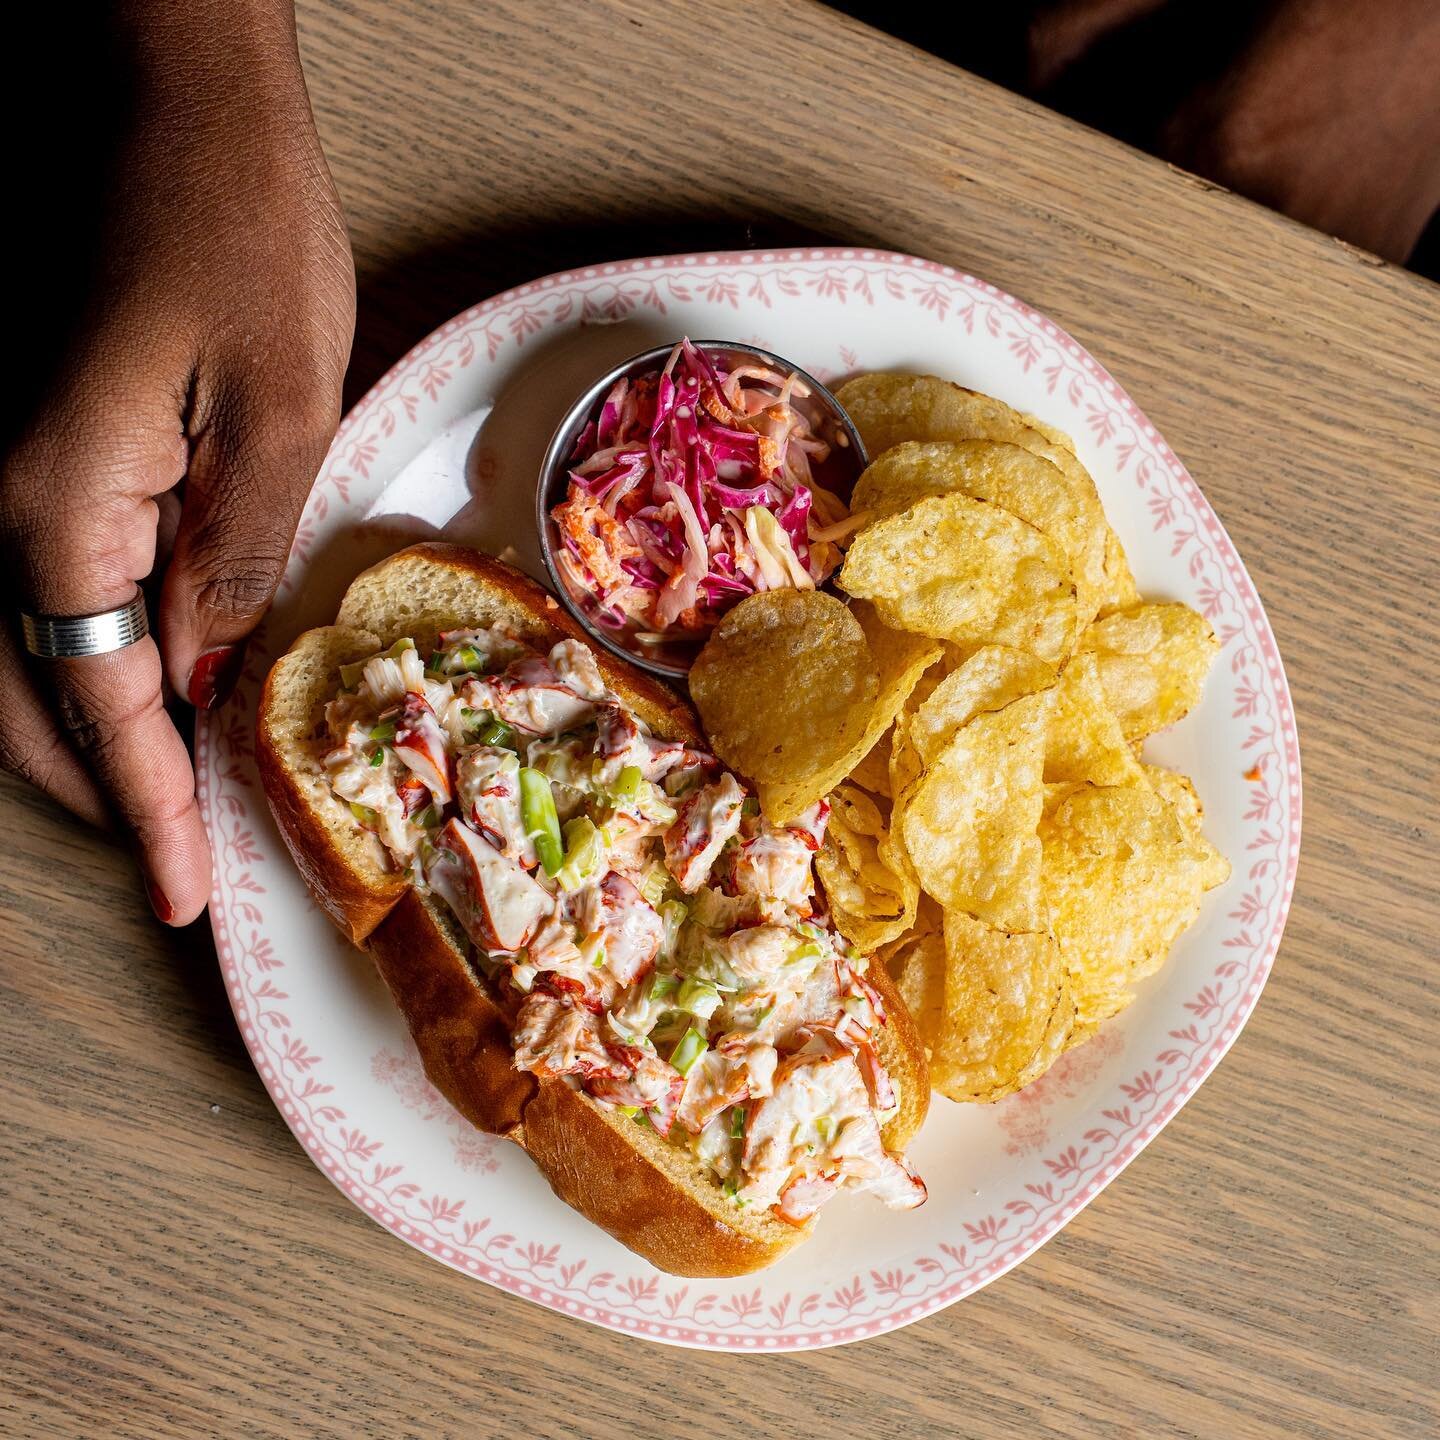 Lobster Rolls and Chips! Need we say more? The perfect bar food does exist 🦞

Doors open at 5 pm tonight. 

@clintonhillcorner 📸